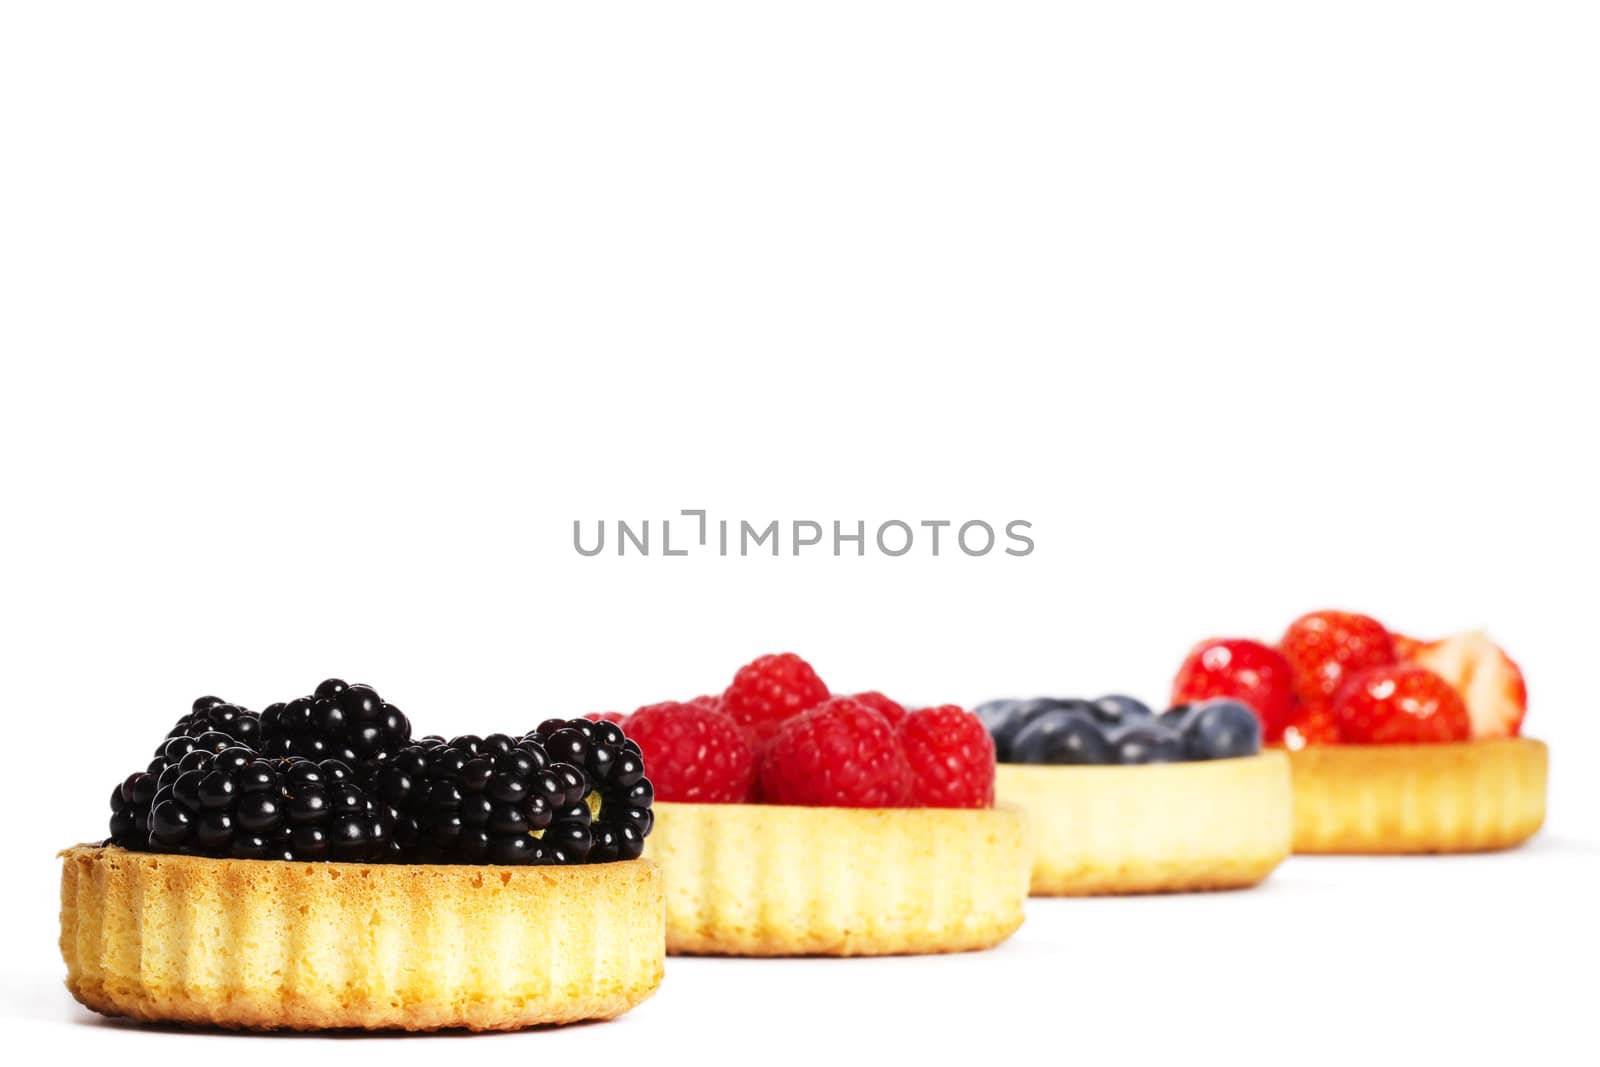 blackberries and other wild berries in tartlet cakes on white background